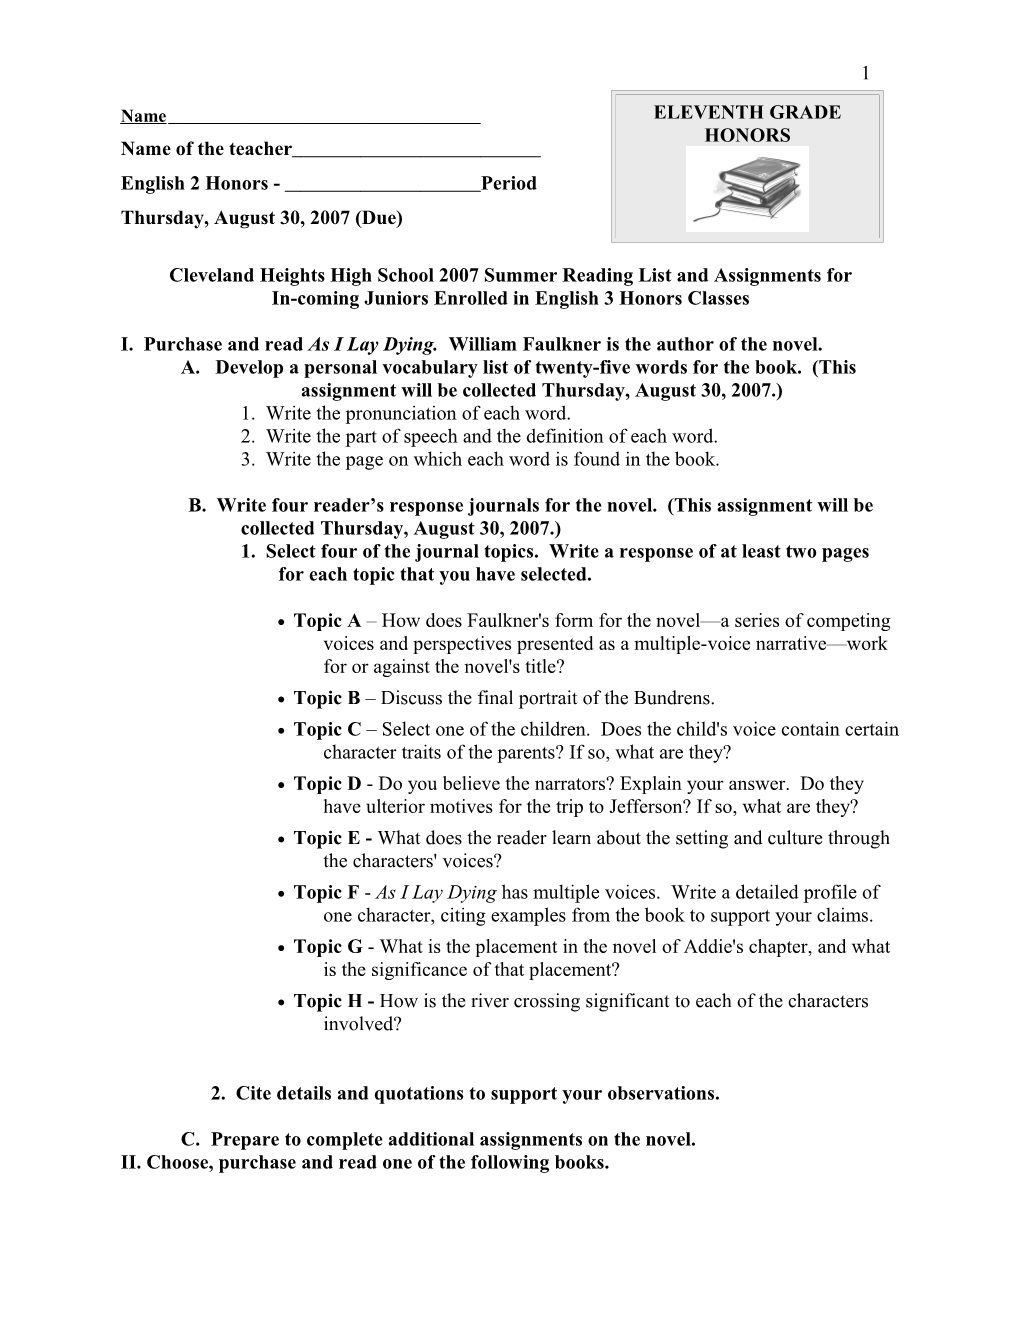 Cleveland Heights High School 2007 Summer Reading List and Assignments For